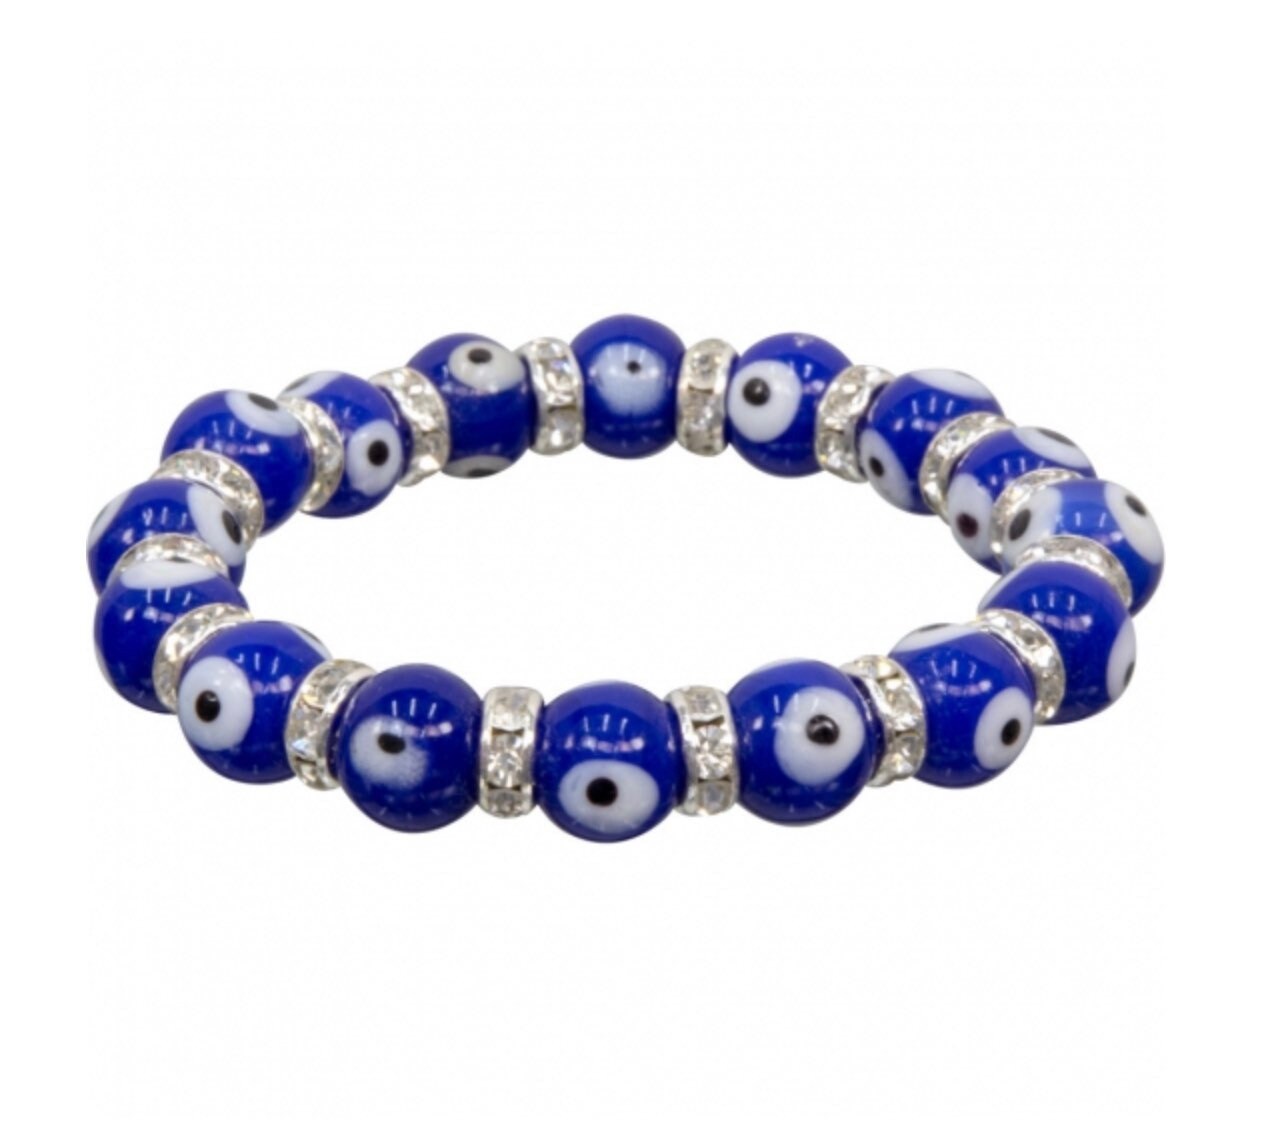 Protect yourself from evil thoughts, spells and ritual with the blue Evil Eye bracelet